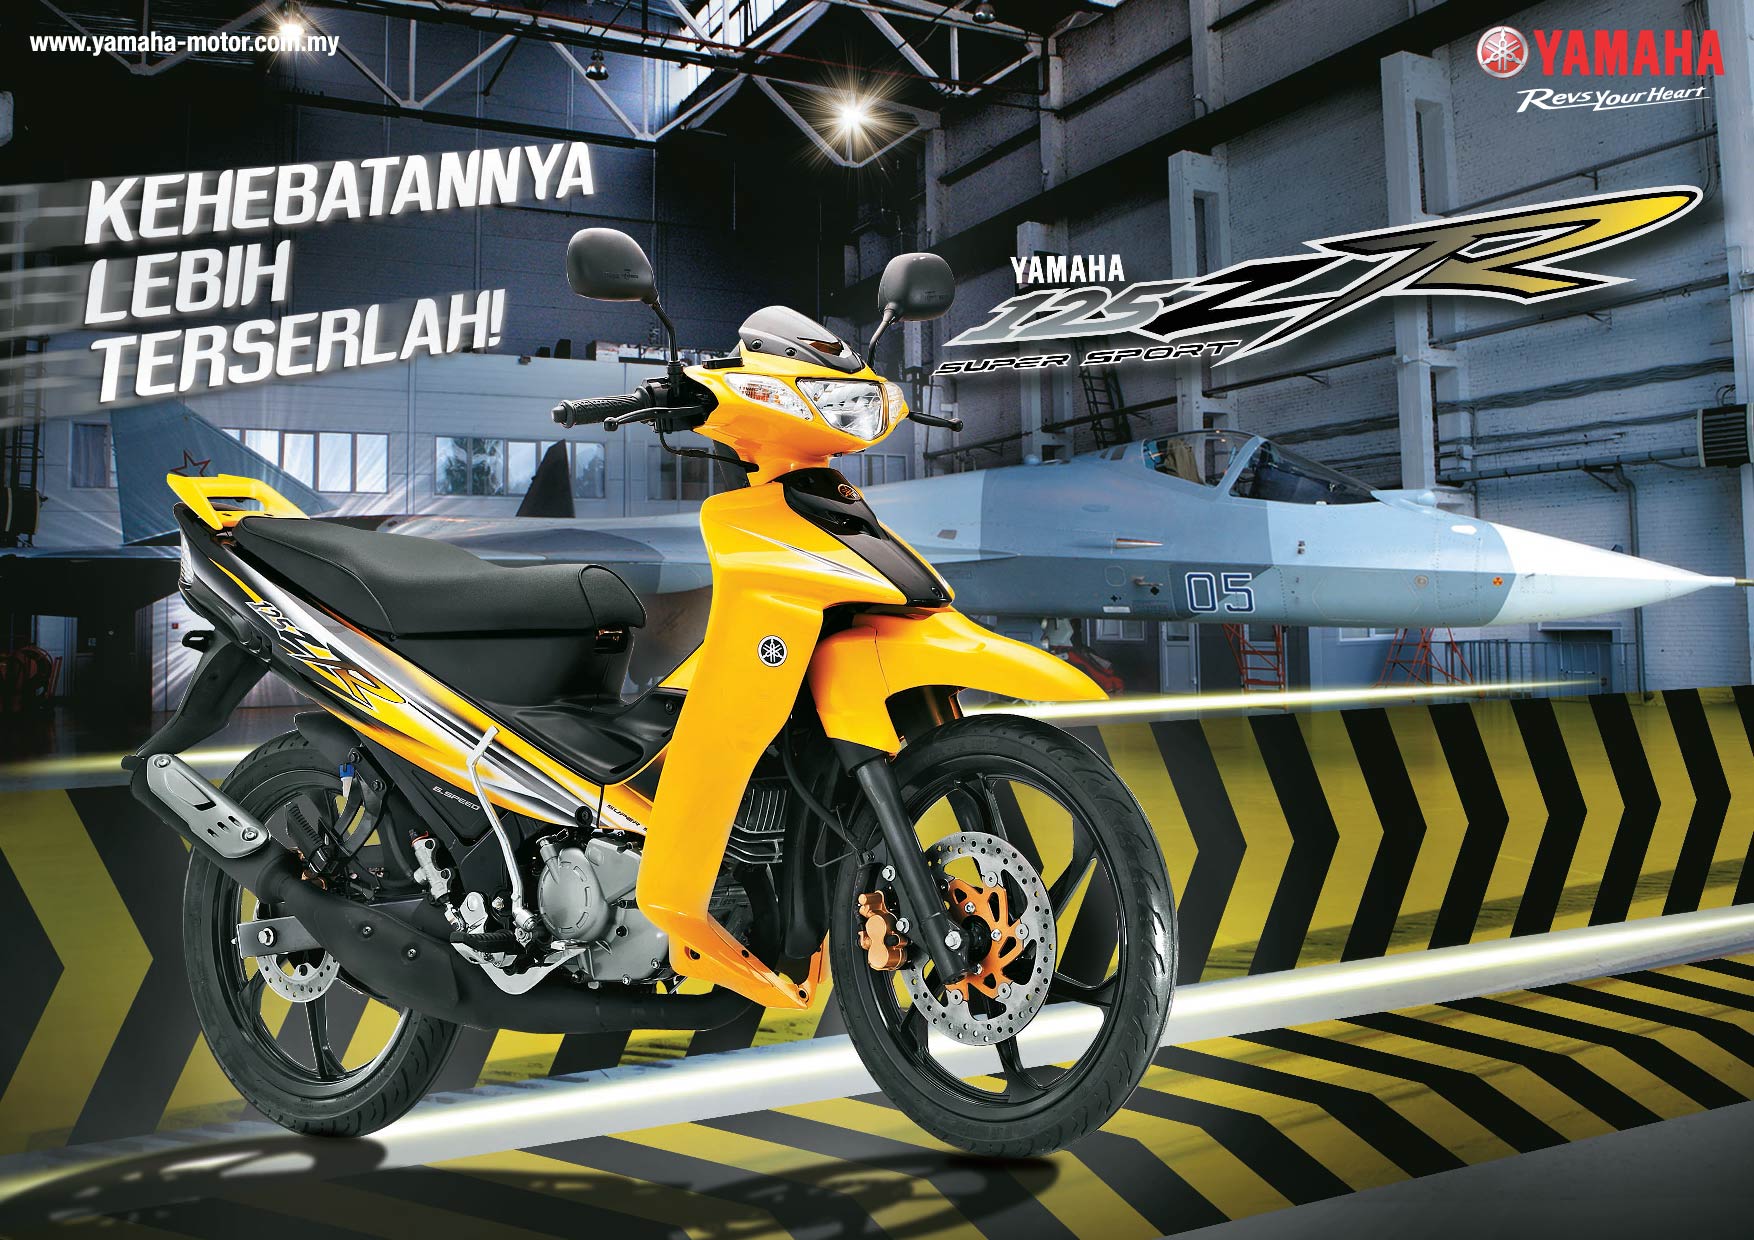 2022 Yamaha 125ZR  now in yellow colour RM7 269